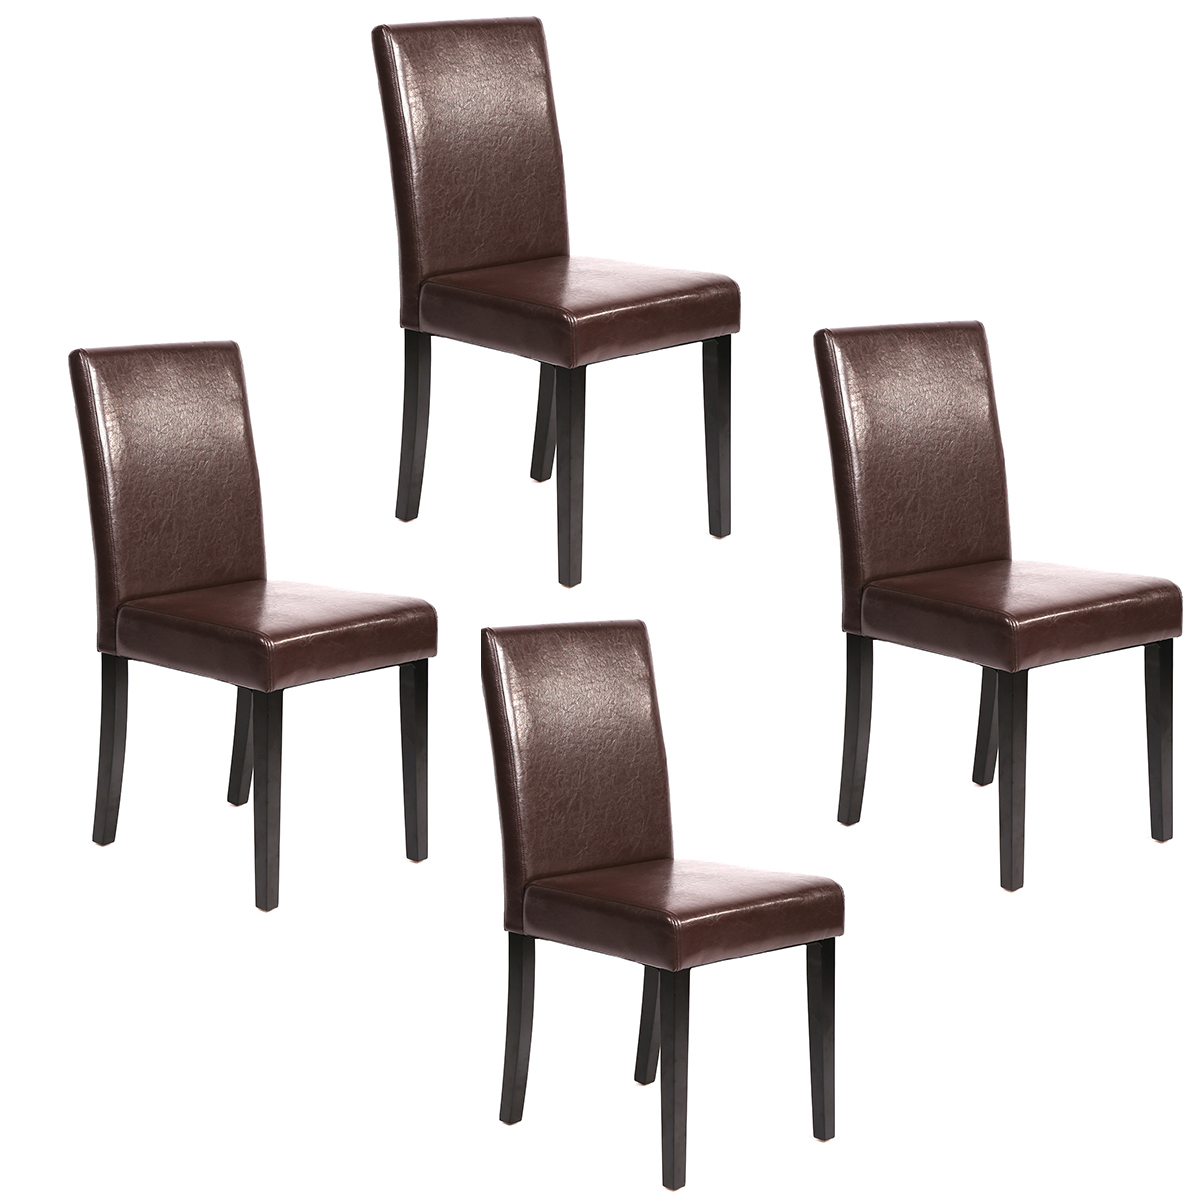 Dining Chairs Dining Room Chairs Parsons Chair Kitchen Chairs Set of 4